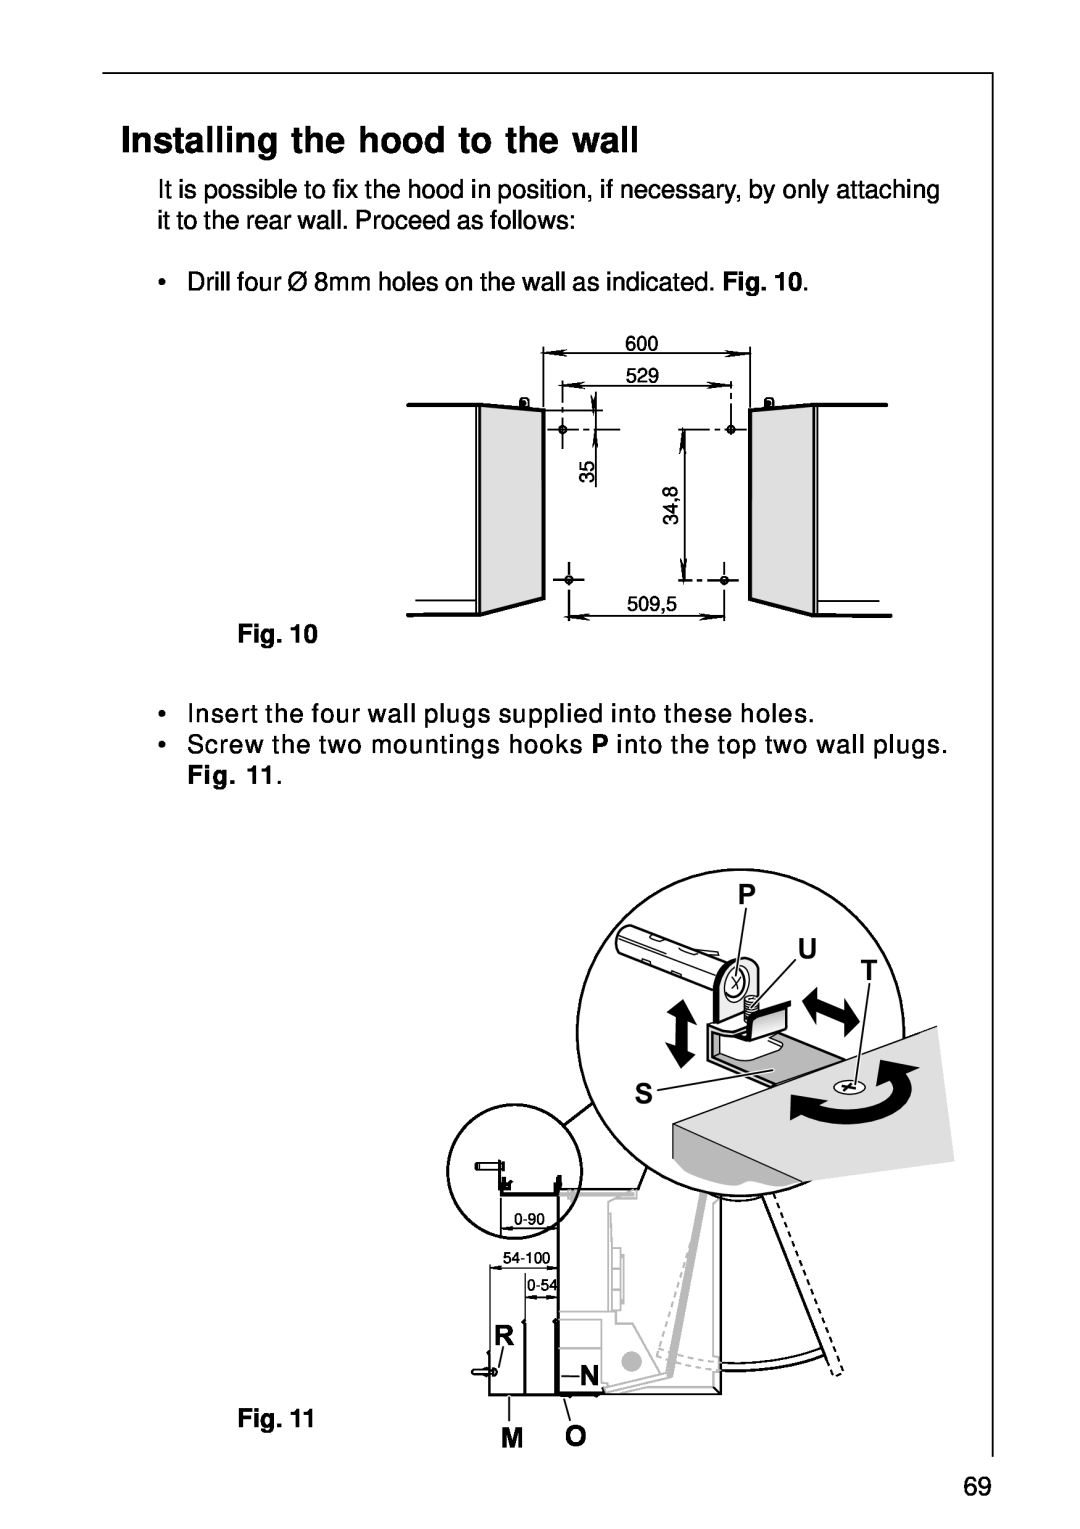 AEG DE 3160 installation instructions Installing the hood to the wall, P U S 